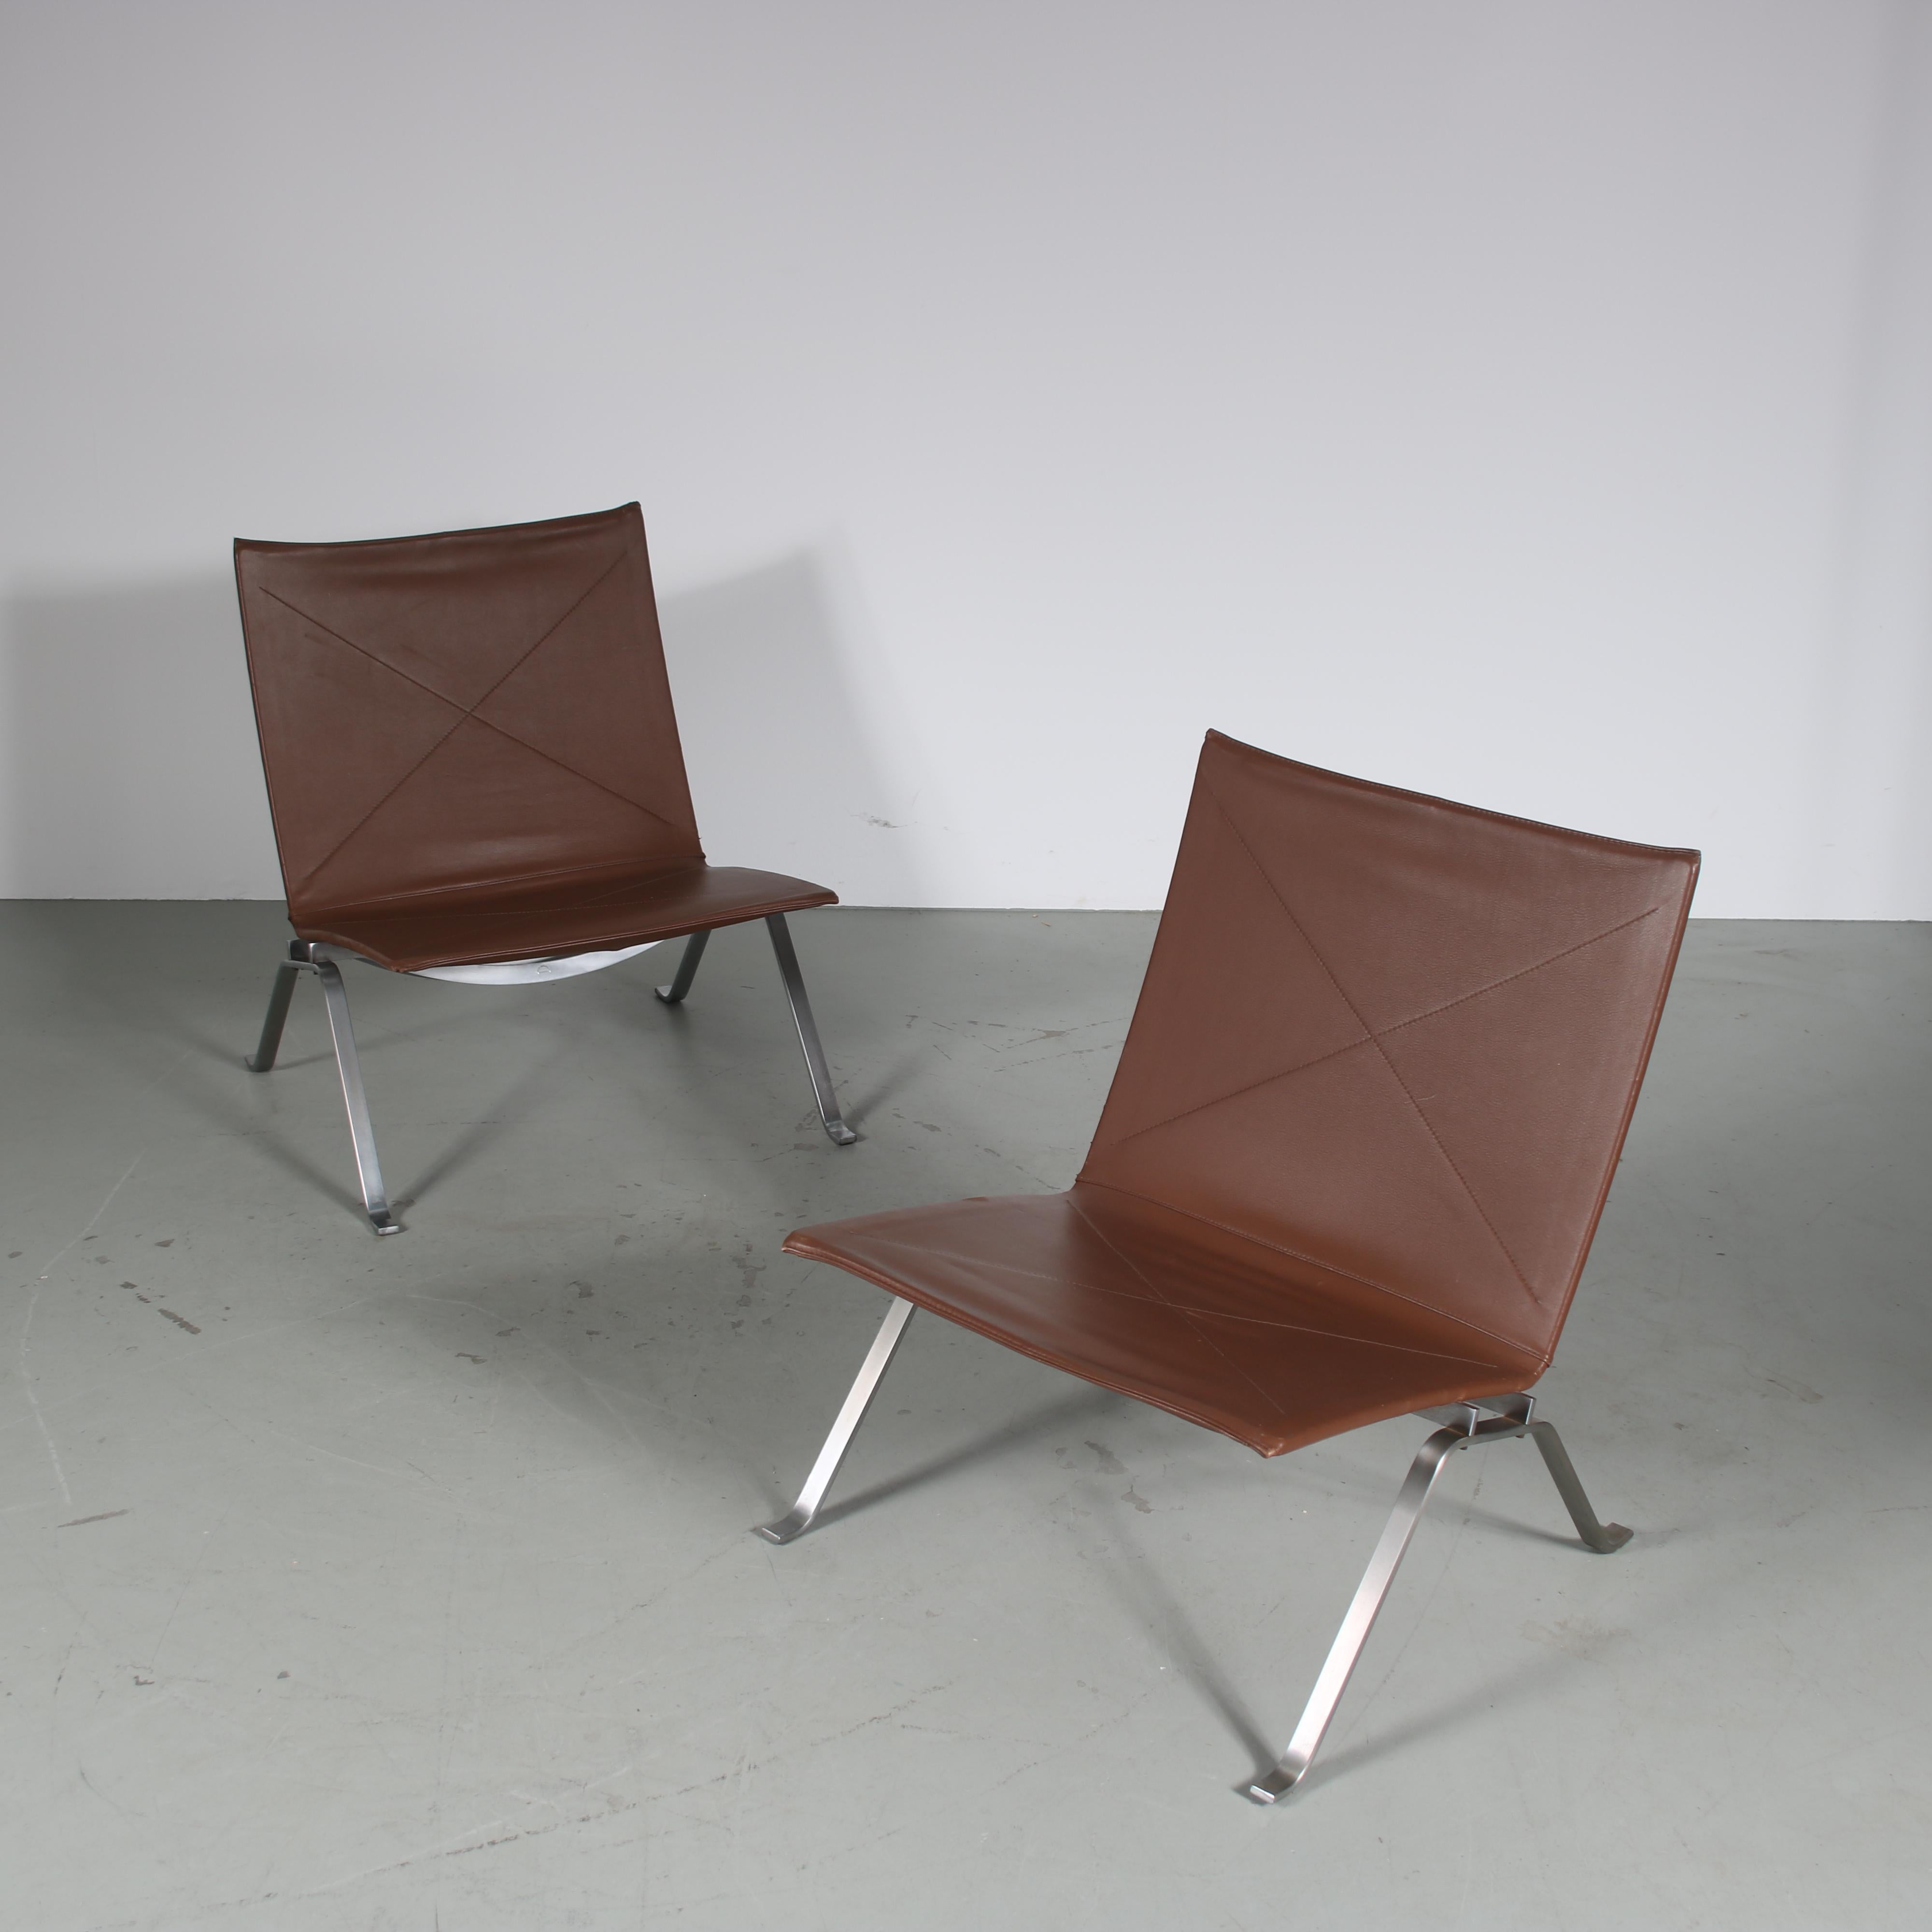 A stunning pair of PK22 lounge chairs designed by Poul Kjaerholm, manufactured by Fritz Hansen in Denmark around 1980.

The PK22 is an iconic model of Danish / Scandinavian design from the mid 20th century. This amazing set is made of high quality